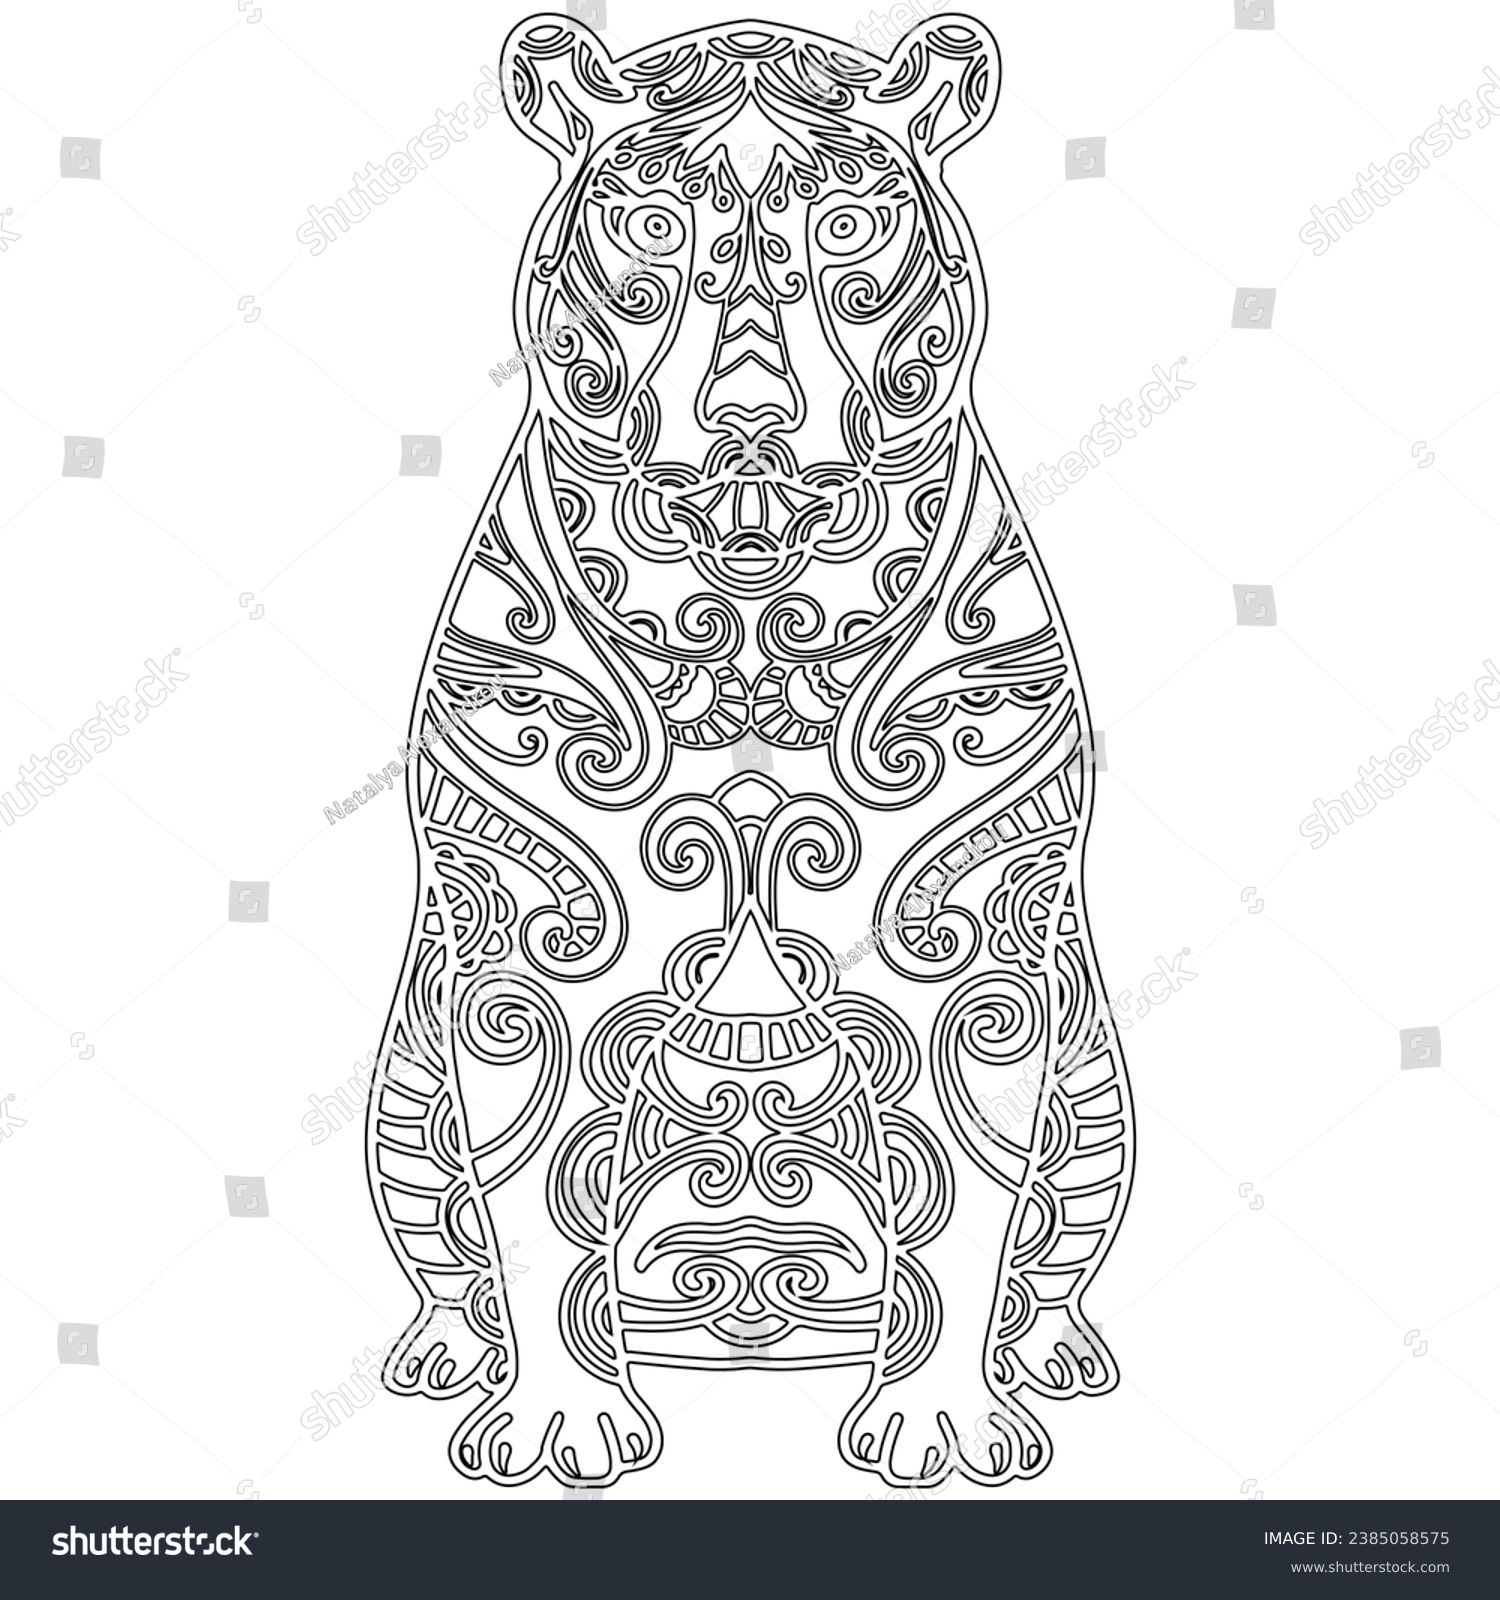 SVG of Ornamental animal 3, tiger with ornament, isolated on white background. Colouring page-306. svg